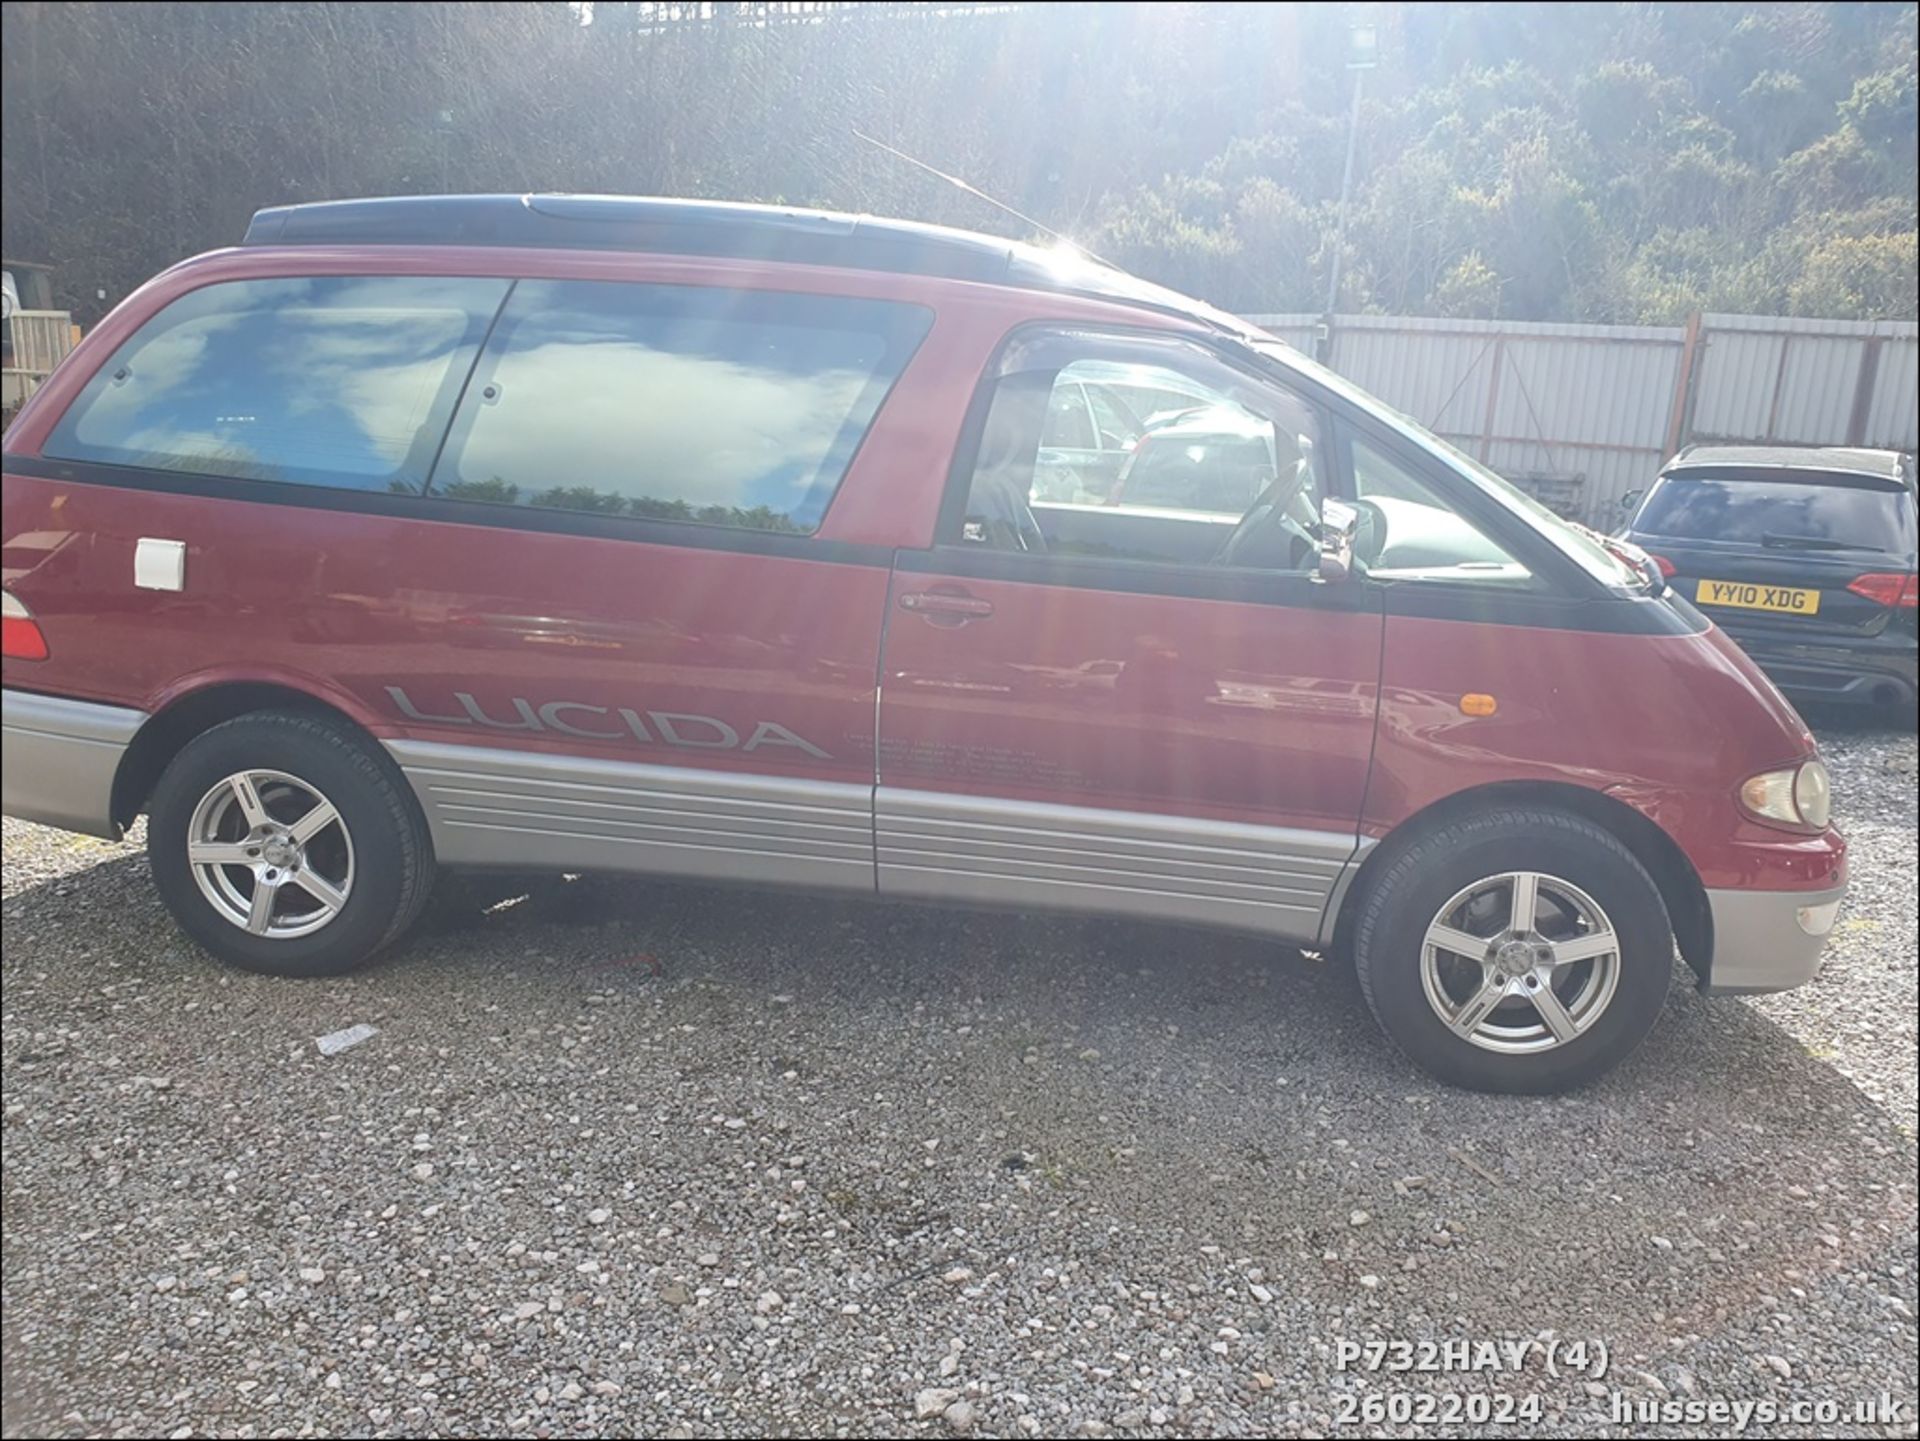 1997 TOYOTA LUCIDA - 2184cc 4dr Van (Red) - Image 5 of 22